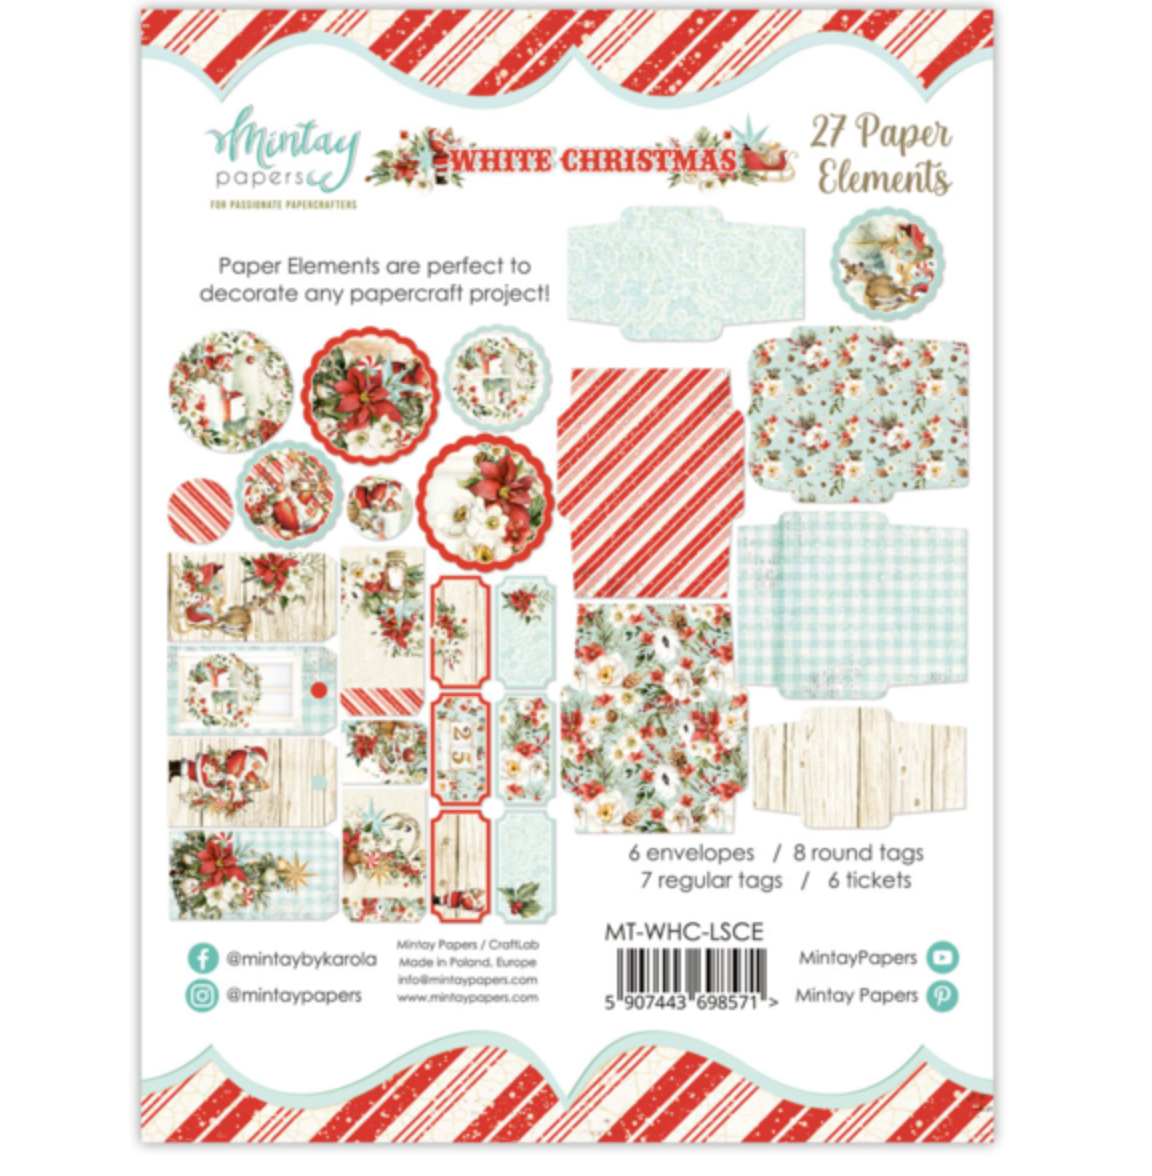 White Christmas - Paper Elements - 27 pcs - Mintay Papers